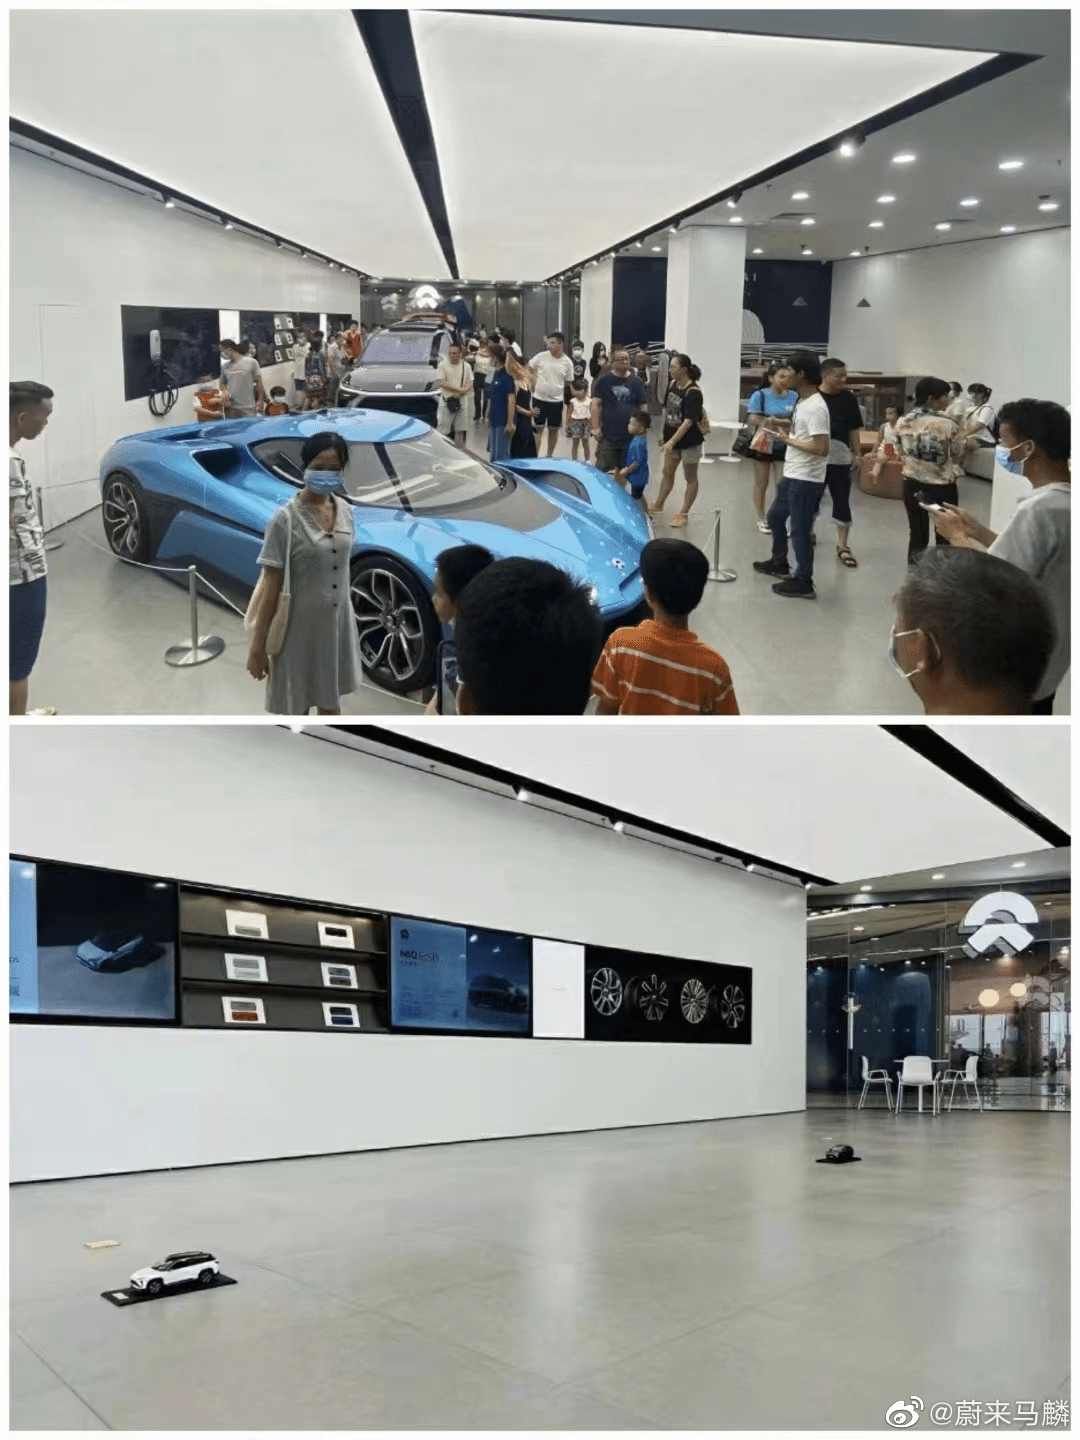 Behind NIO's surge in deliveries: Some showrooms sold out of show cars and had to display models-CnEVPost